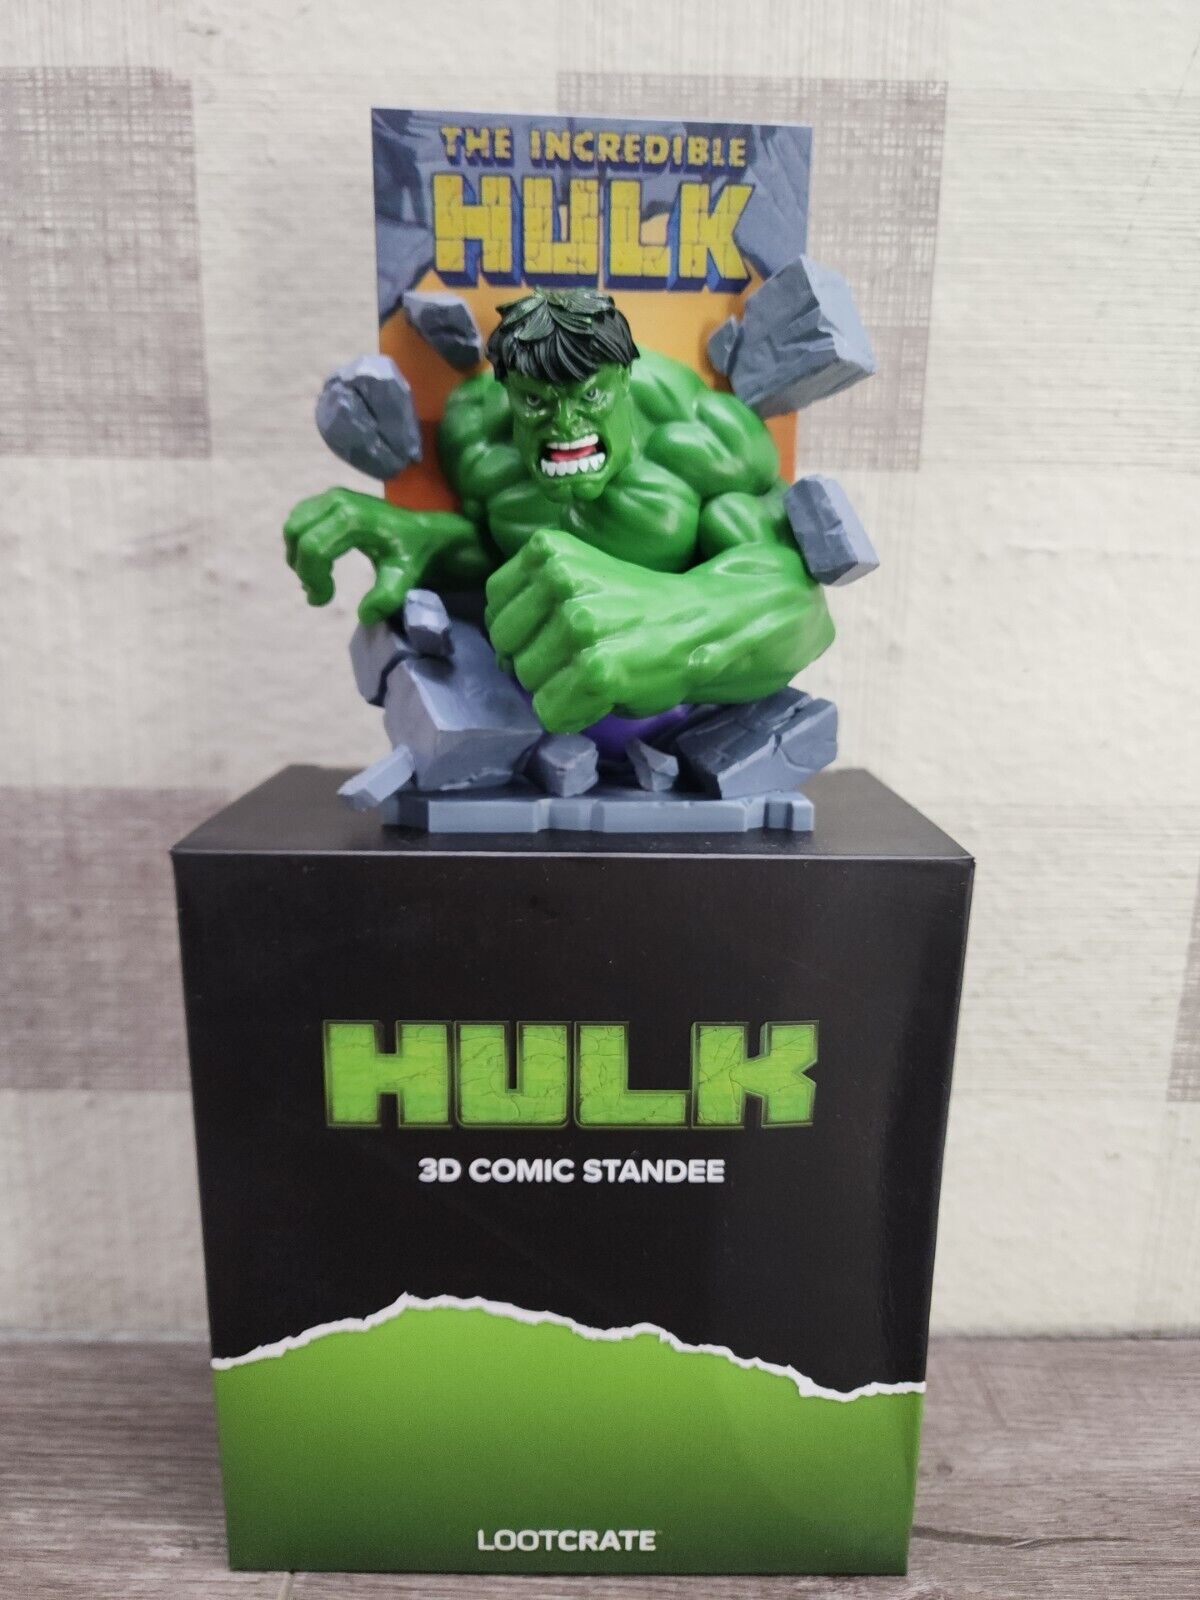 Marvel The Incredible Hulk 3D Comic Standee Loot Crate Collectible - New ✅